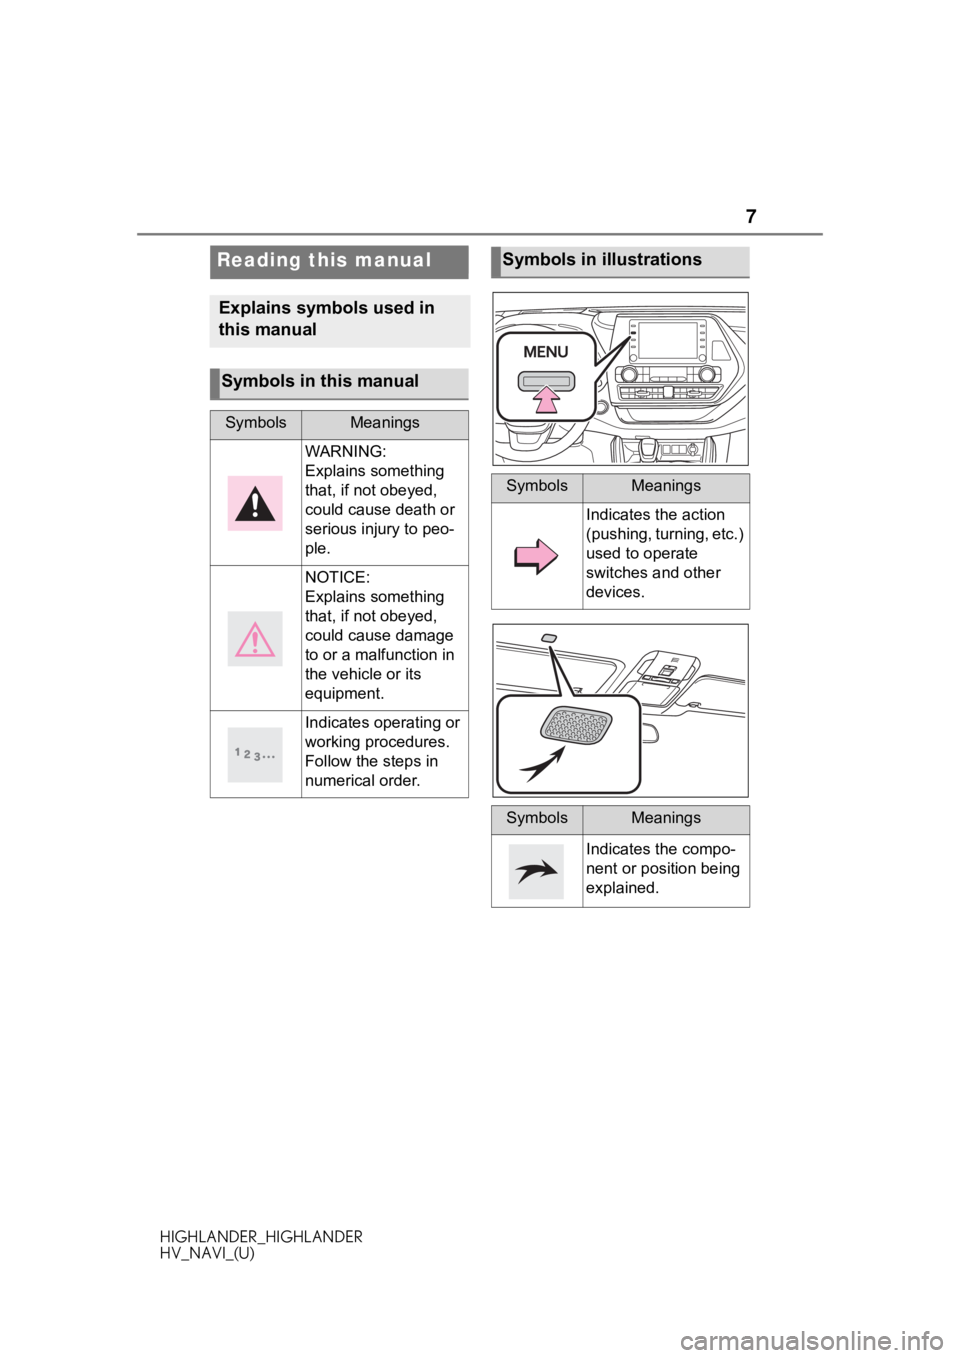 TOYOTA HIGHLANDER 2020  Accessories, Audio & Navigation (in English) 7
HIGHLANDER_HIGHLANDER
HV_NAVI_(U)
Reading this manual
Explains symbols used in 
this manual
Symbols in this manual
SymbolsMeanings
WARNING:
Explains something 
that, if not obeyed, 
could cause deat